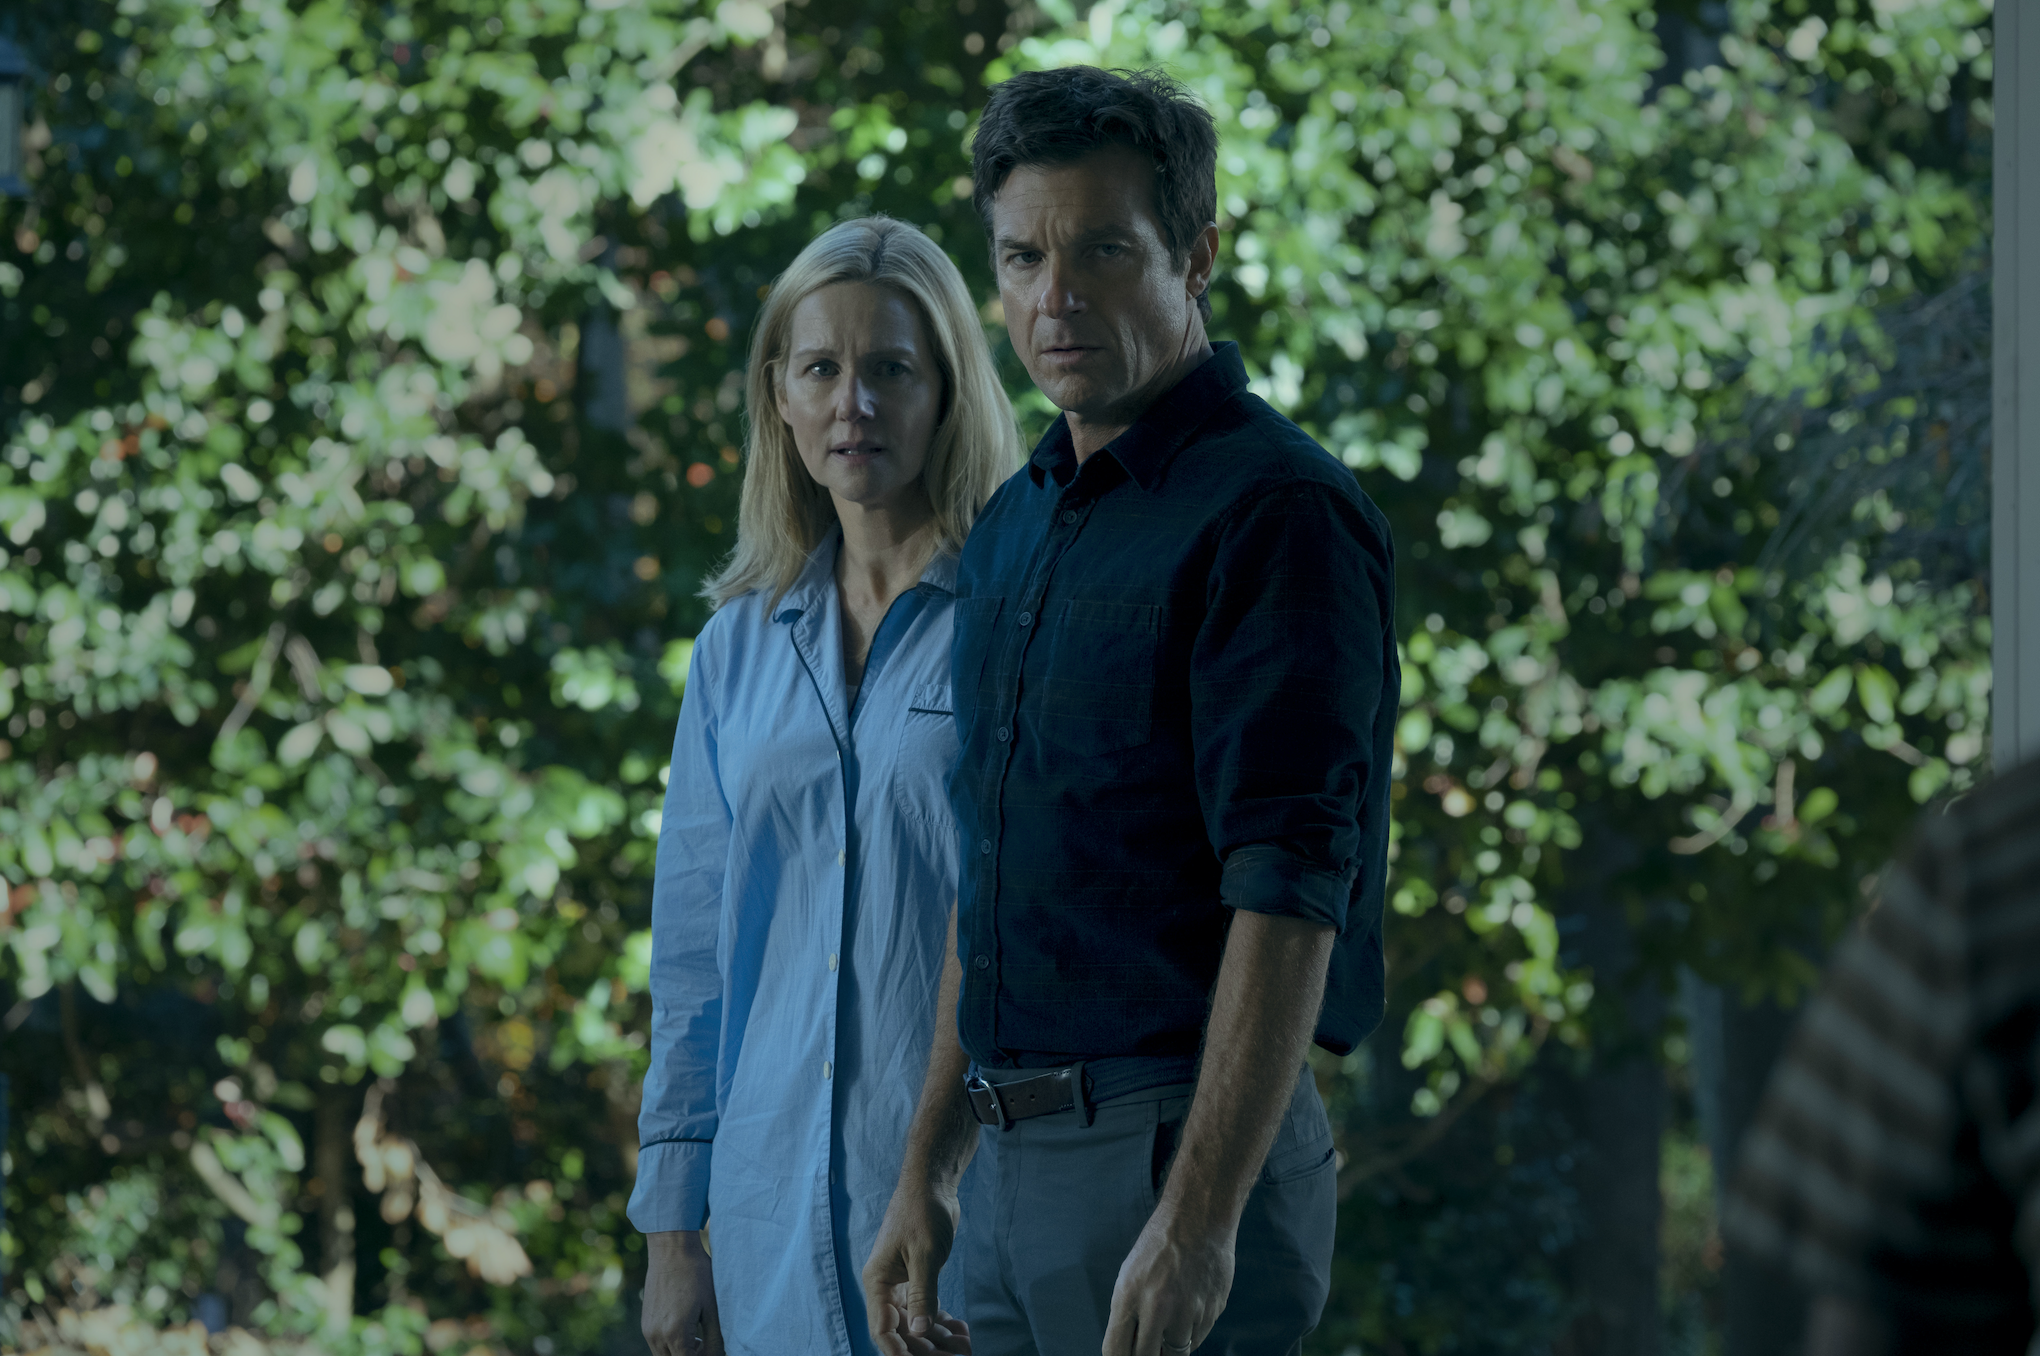 Where Is Netflix's 'Ozark' Filmed? The Netflix Show's Location Isn't as  Obvious as You Think